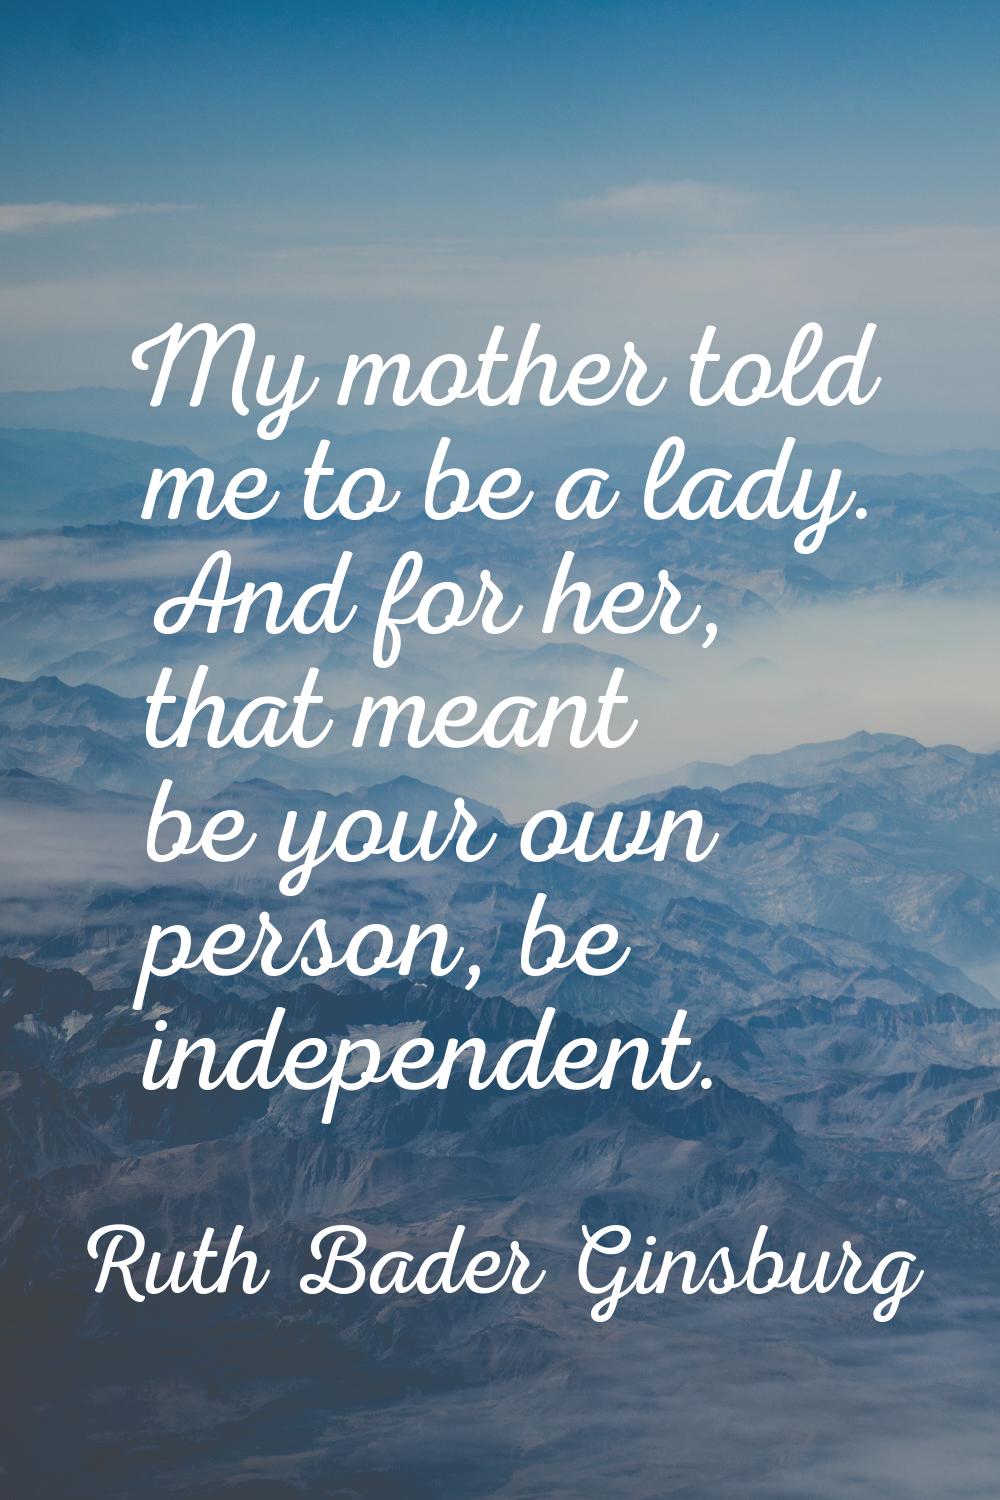 My mother told me to be a lady. And for her, that meant be your own person, be independent.